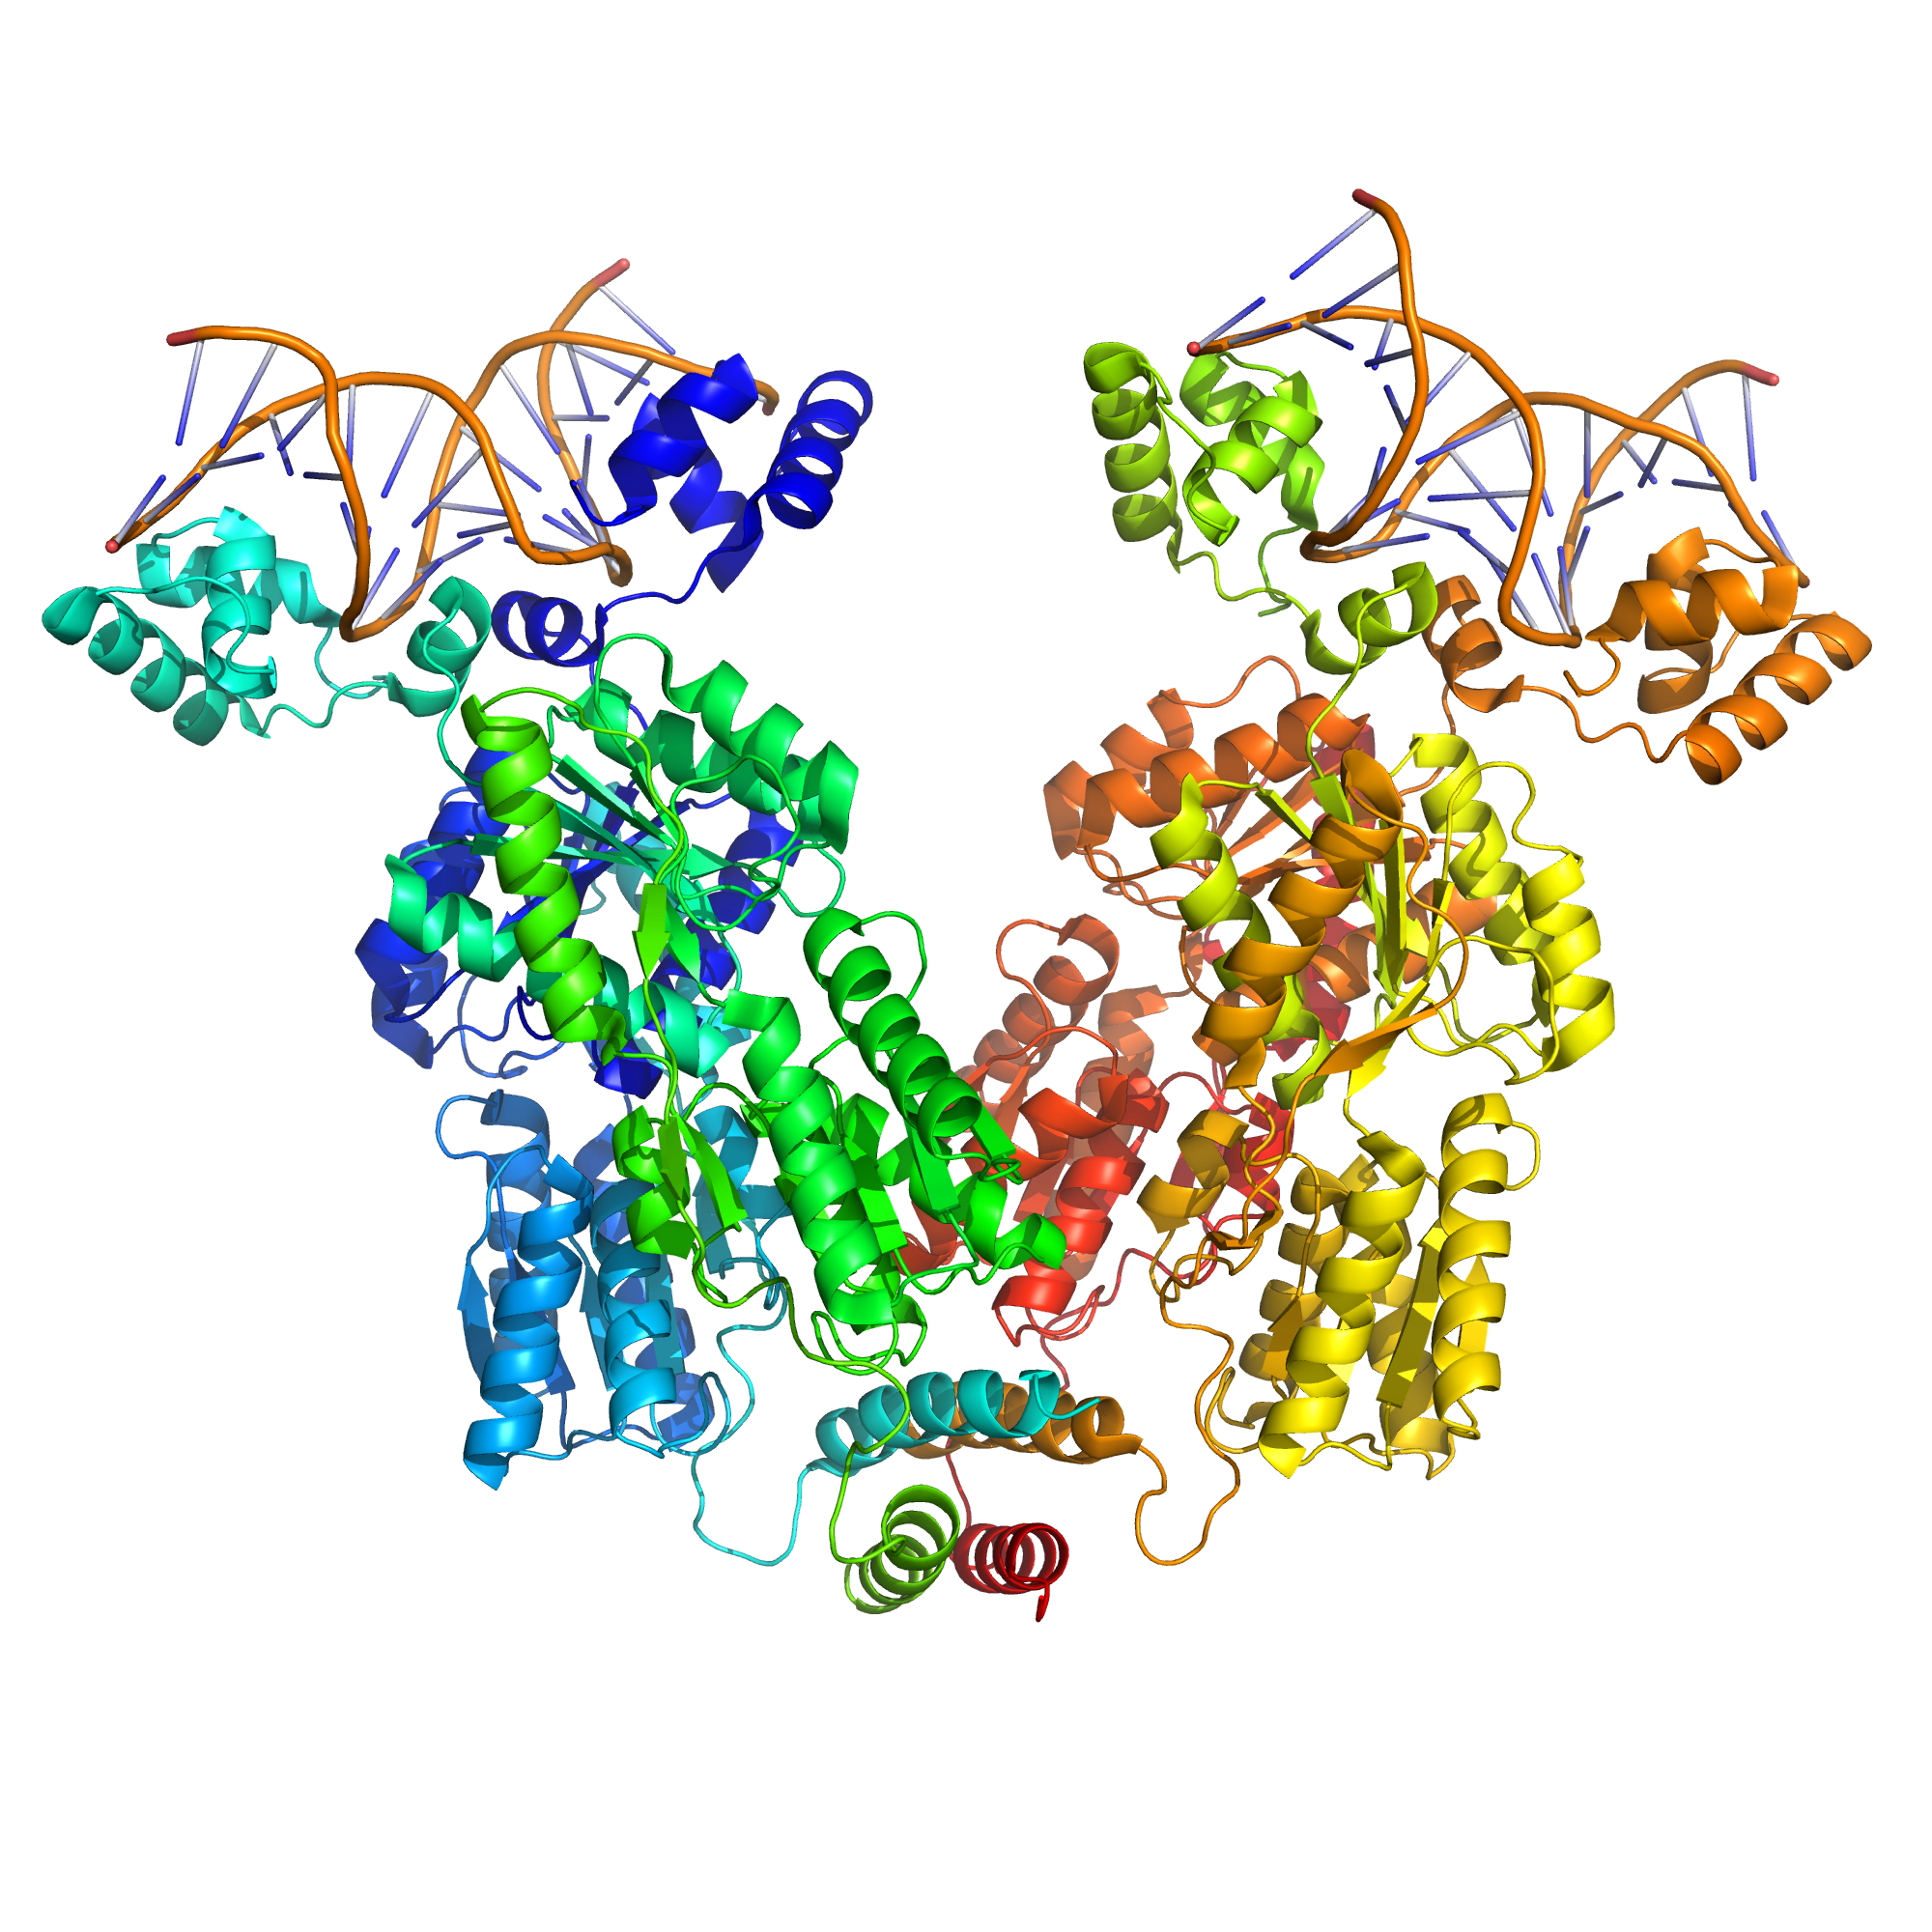 A simulated structural model of a complex between the lac repressor protein (LacI) and a 107-bp-long DNA segment. Two dimeric LacI functional subunits (green +blue and yellow + orange) each bind a DNA operator sequence (top). The mobility of the DNA-binding head groups coupled to the stable body of the body of LacI provide the force for the looping of the DNA (Ville et al.).